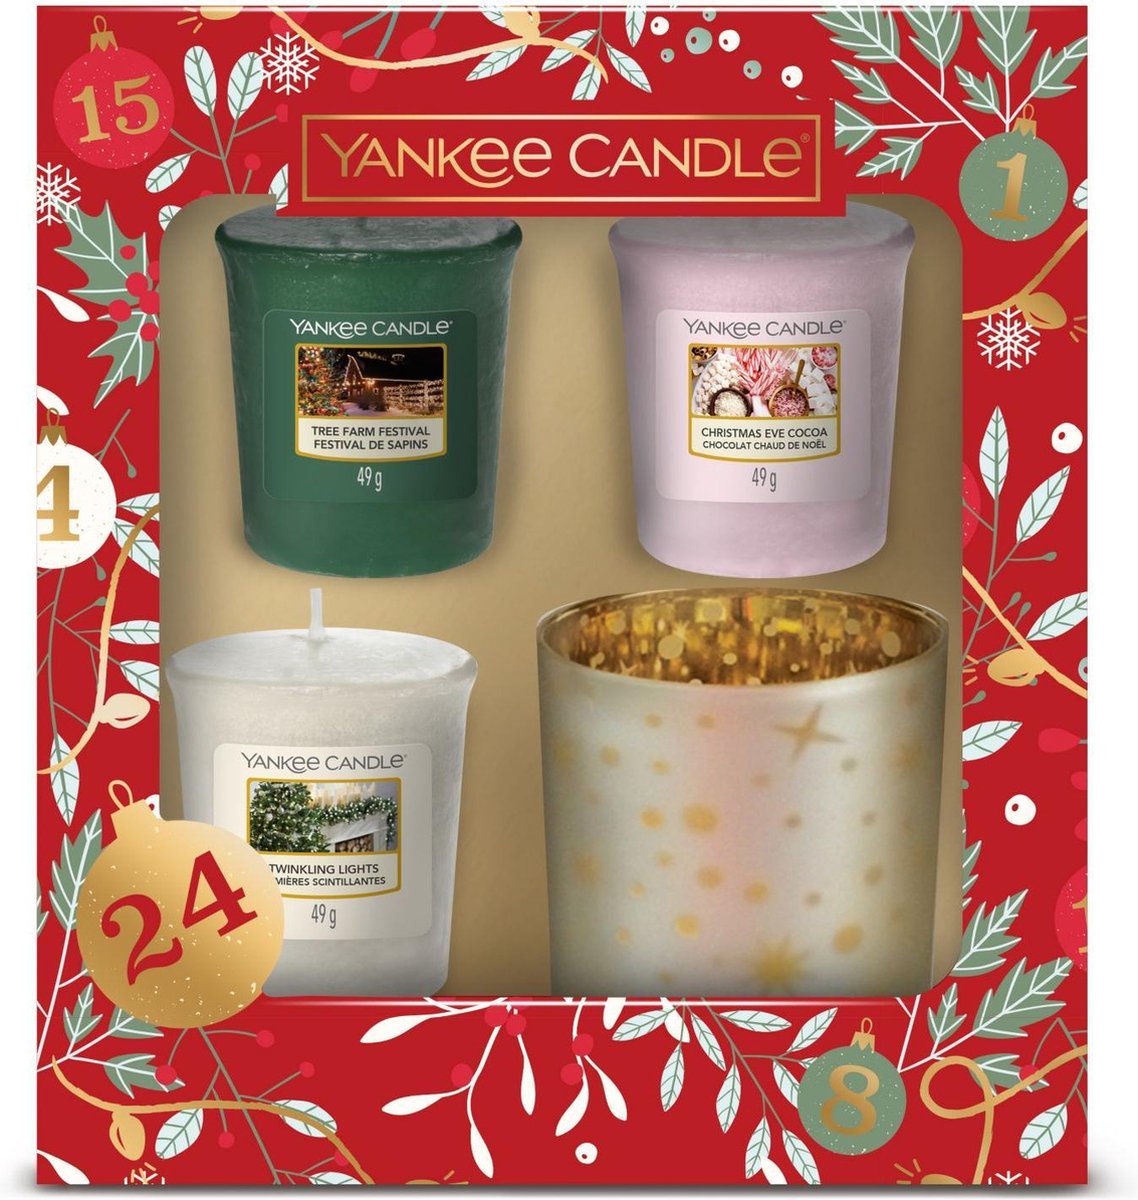 Yankee Candle Countdown To Christmas Geurkaars Giftset - 3 Votives & Holder - Yankee Candle